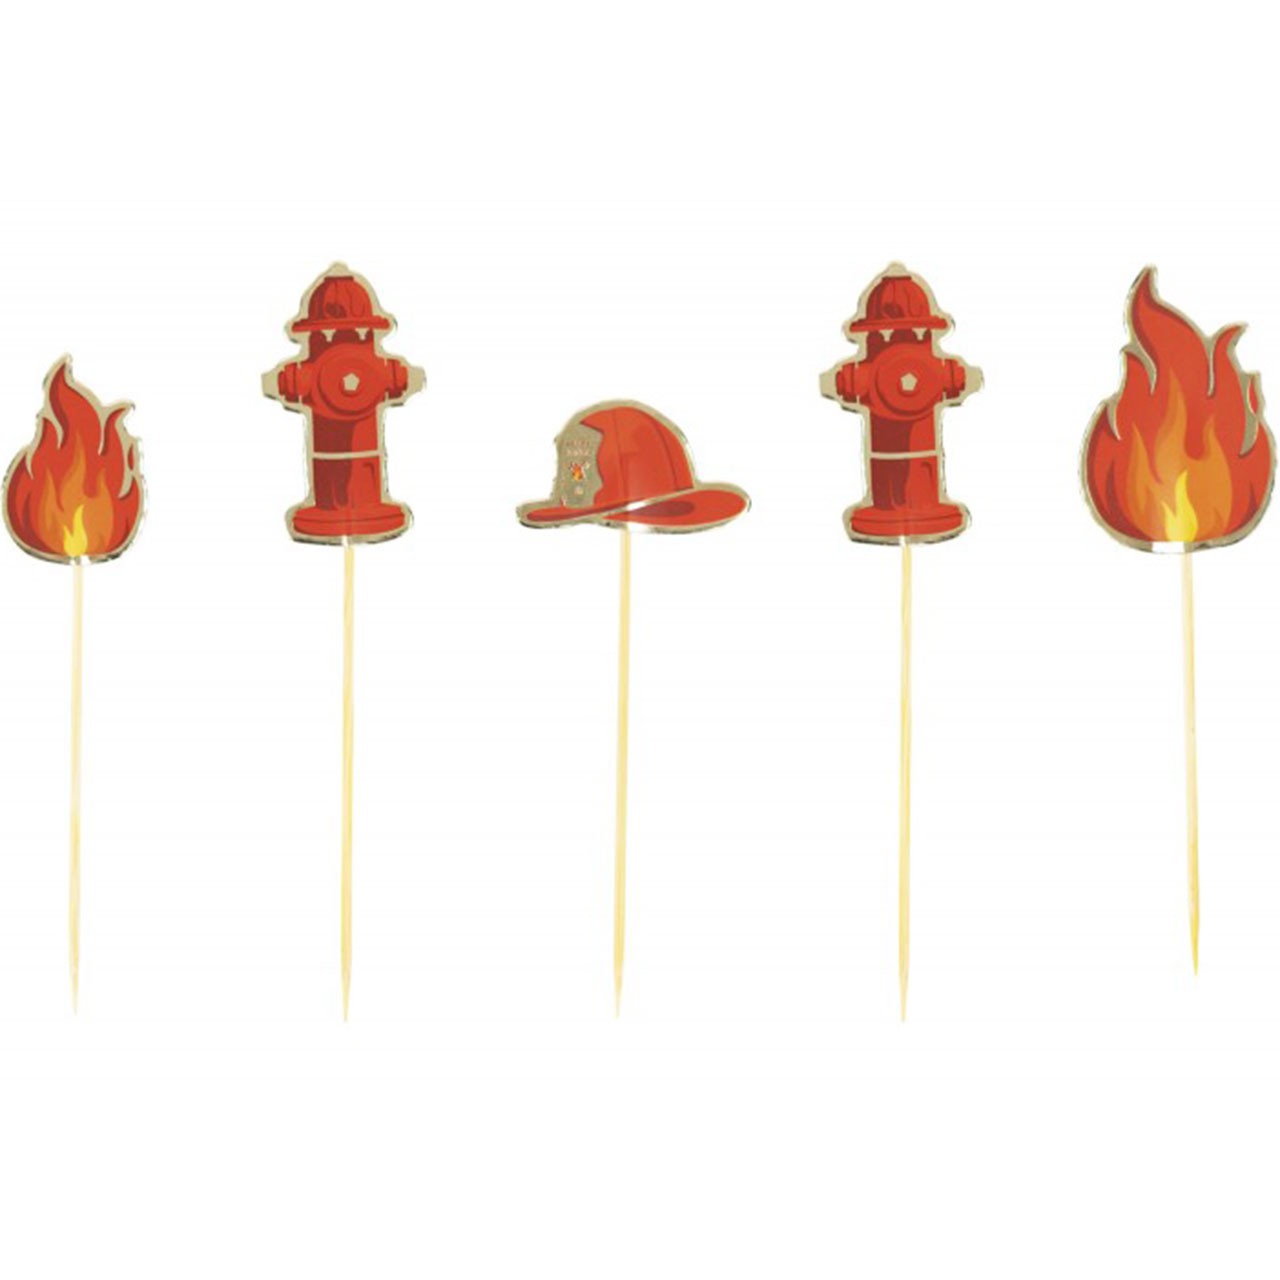 6 Fire Engine Cake Toppers 